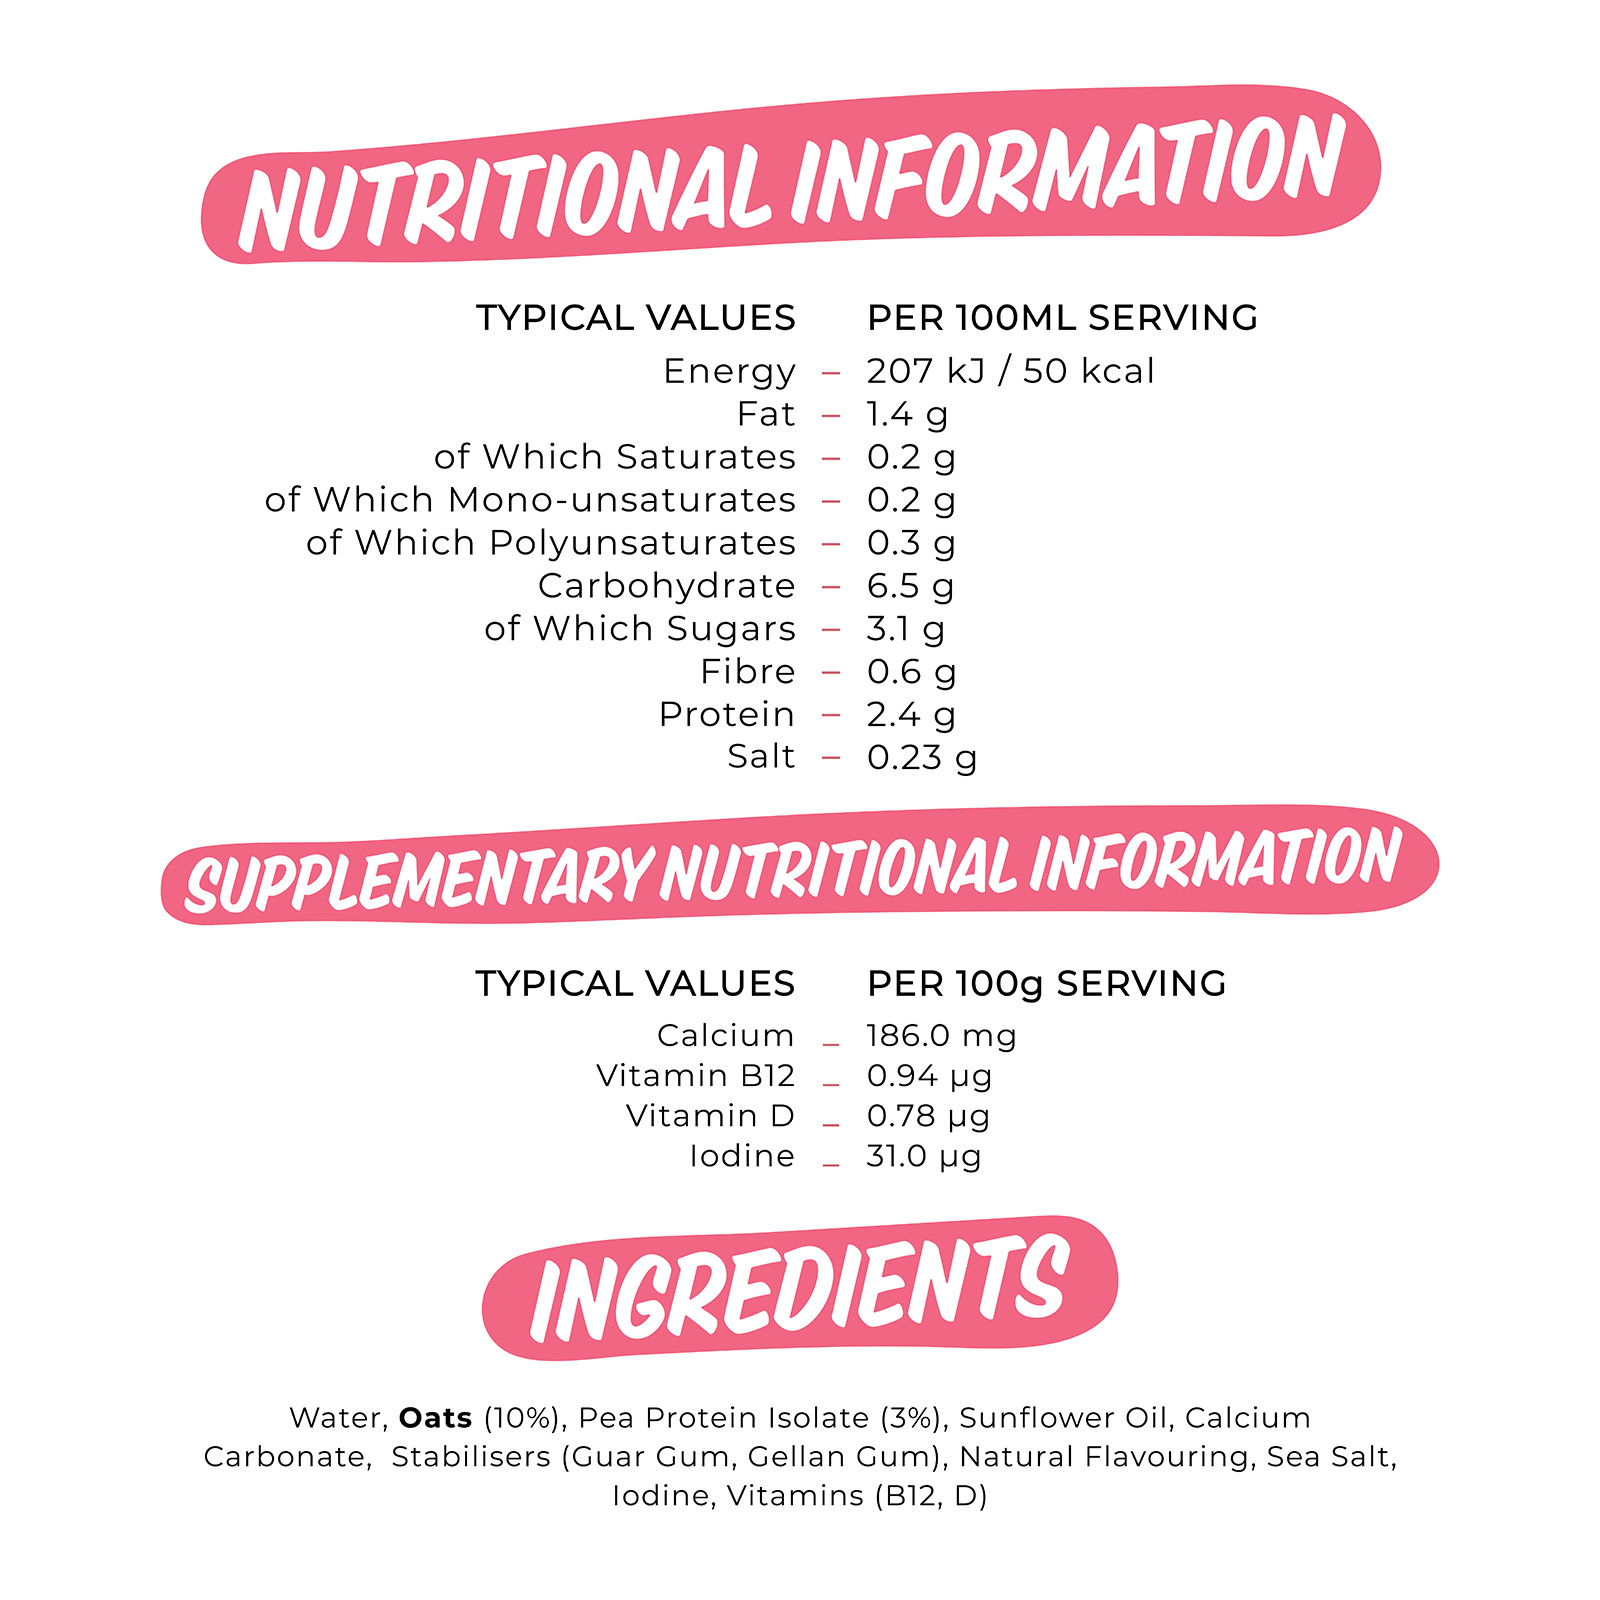 

                          TYPICAL VALUES PER 100ML SERVING Energy 207 kJ / 50 kcal Fat 1.4 g of Which Saturates 0.2 g of Which Mono-unsaturates 0.2 g of Which Polyunsaturates 0.3 g Carbohydrate 6.5 g of Which Sugars 3.1 g Fibre 0.6 g Protein 2.4 g Salt 0.23 g 
                          CUPPLEMENTARY NUTRITIONAL INFORMATION 
                          TYPICAL VALUES PER 100g SERVING Calcium _ 186.0 mg Vitamin B12 _ 0.94 pg Vitamin D _ 0.78 pg Iodine _ 31.0 pg 

                          Water, Oats (10%), Pea Protein Isolate (3%), Sunflower Oil, Calcium Carbonate, Stabilisers (Guar Gum, Gellan Gum), Natural Flavouring, Sea Salt, Iodine, Vitamins (B12, D) 

                          